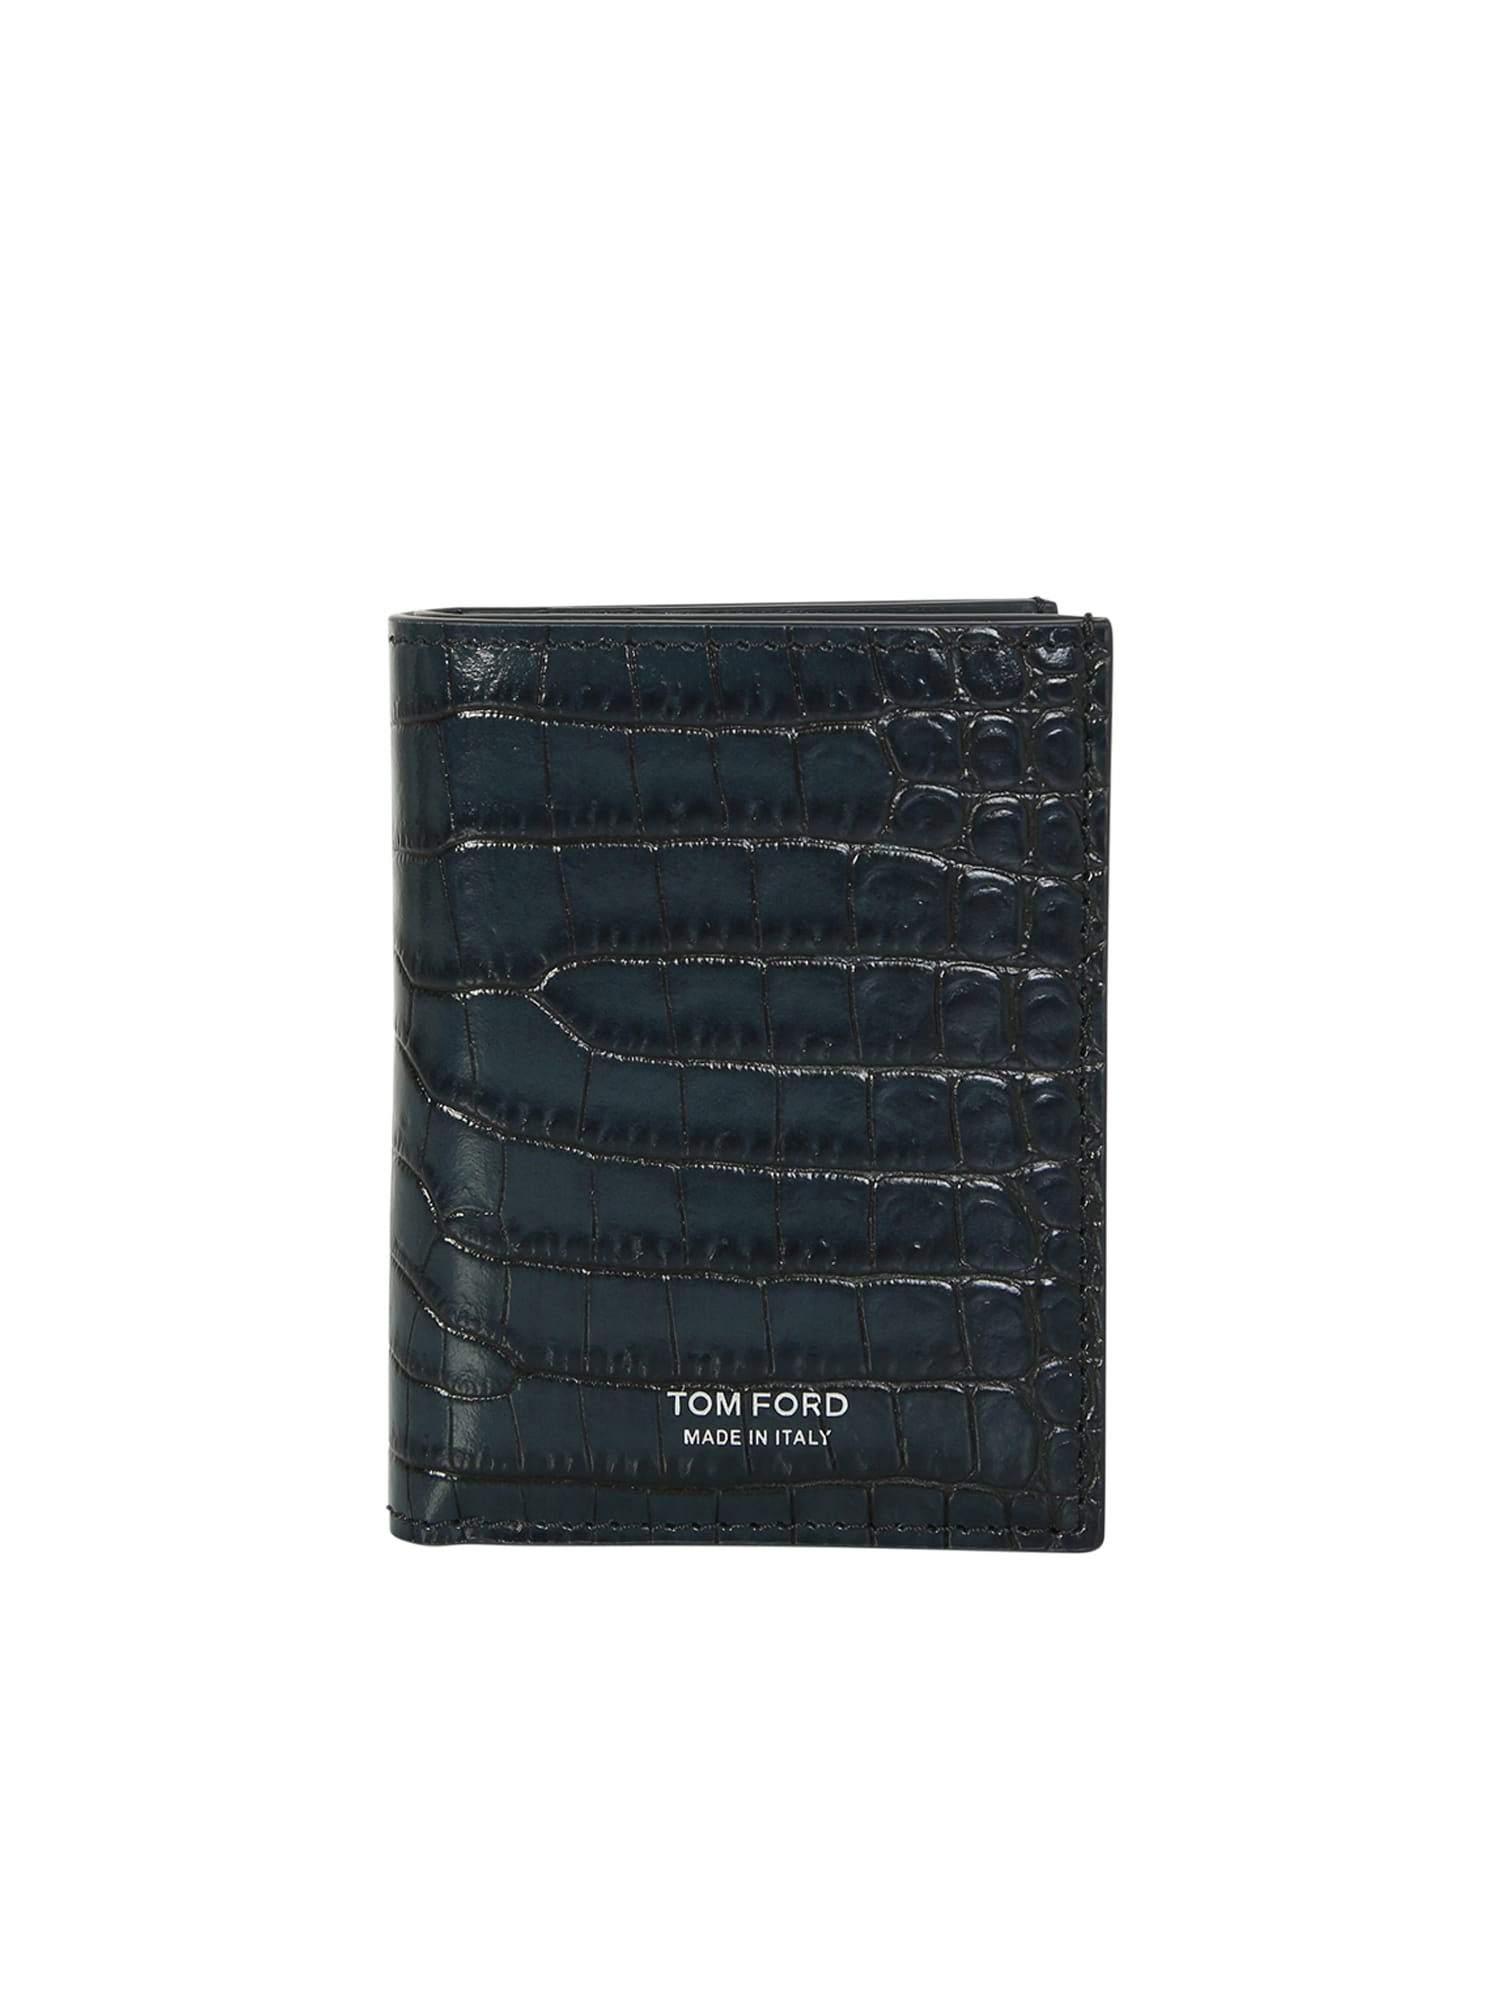 In This Leather Wallet Tom Ford Features The Distinctive T Line Design